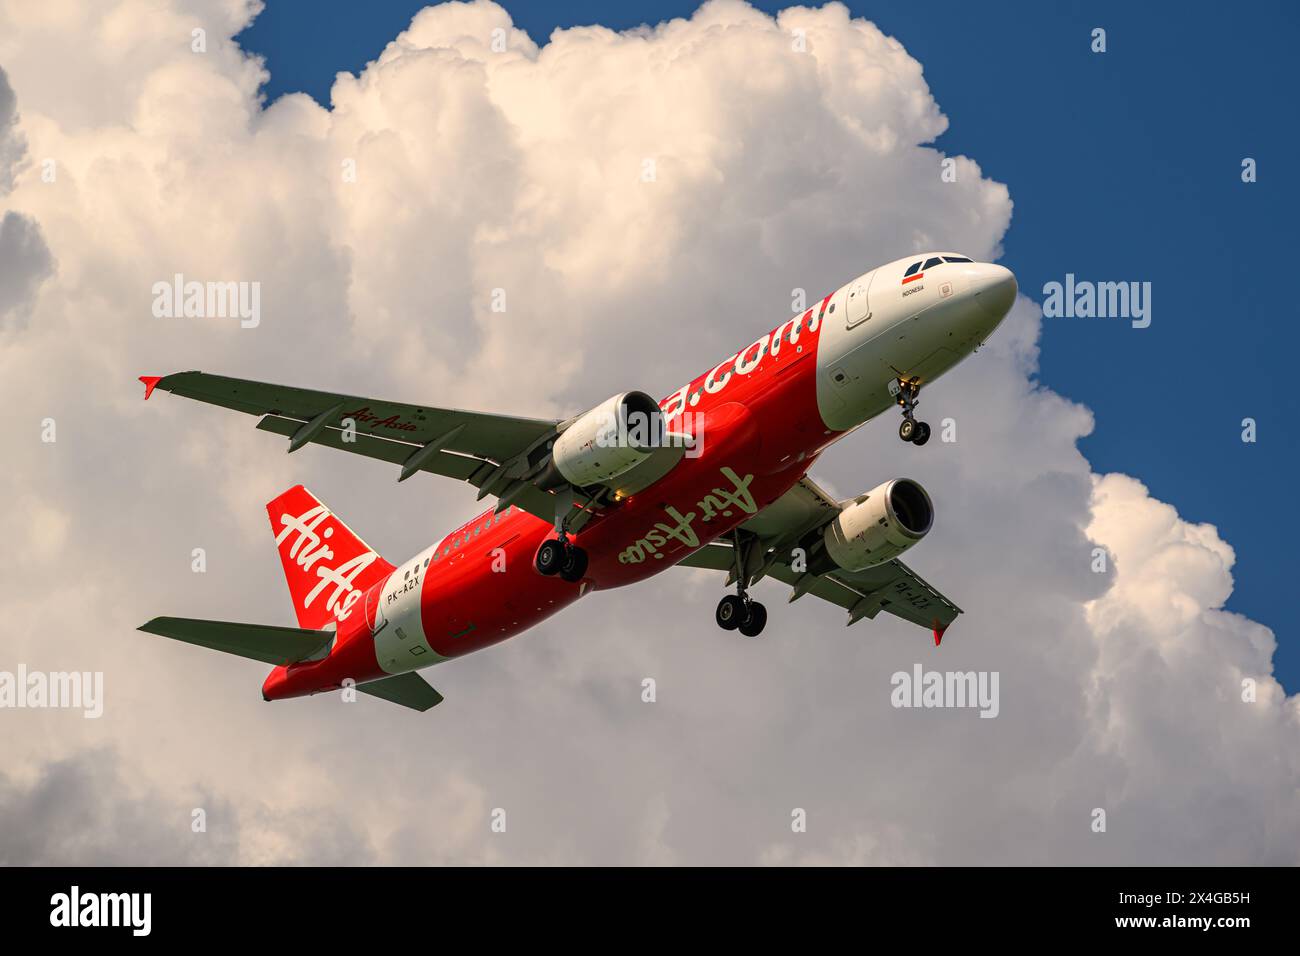 Indonesia AirAsia, Airbus A320-200, PK-AZX, on final approach to Singapore Changi airport Stock Photo